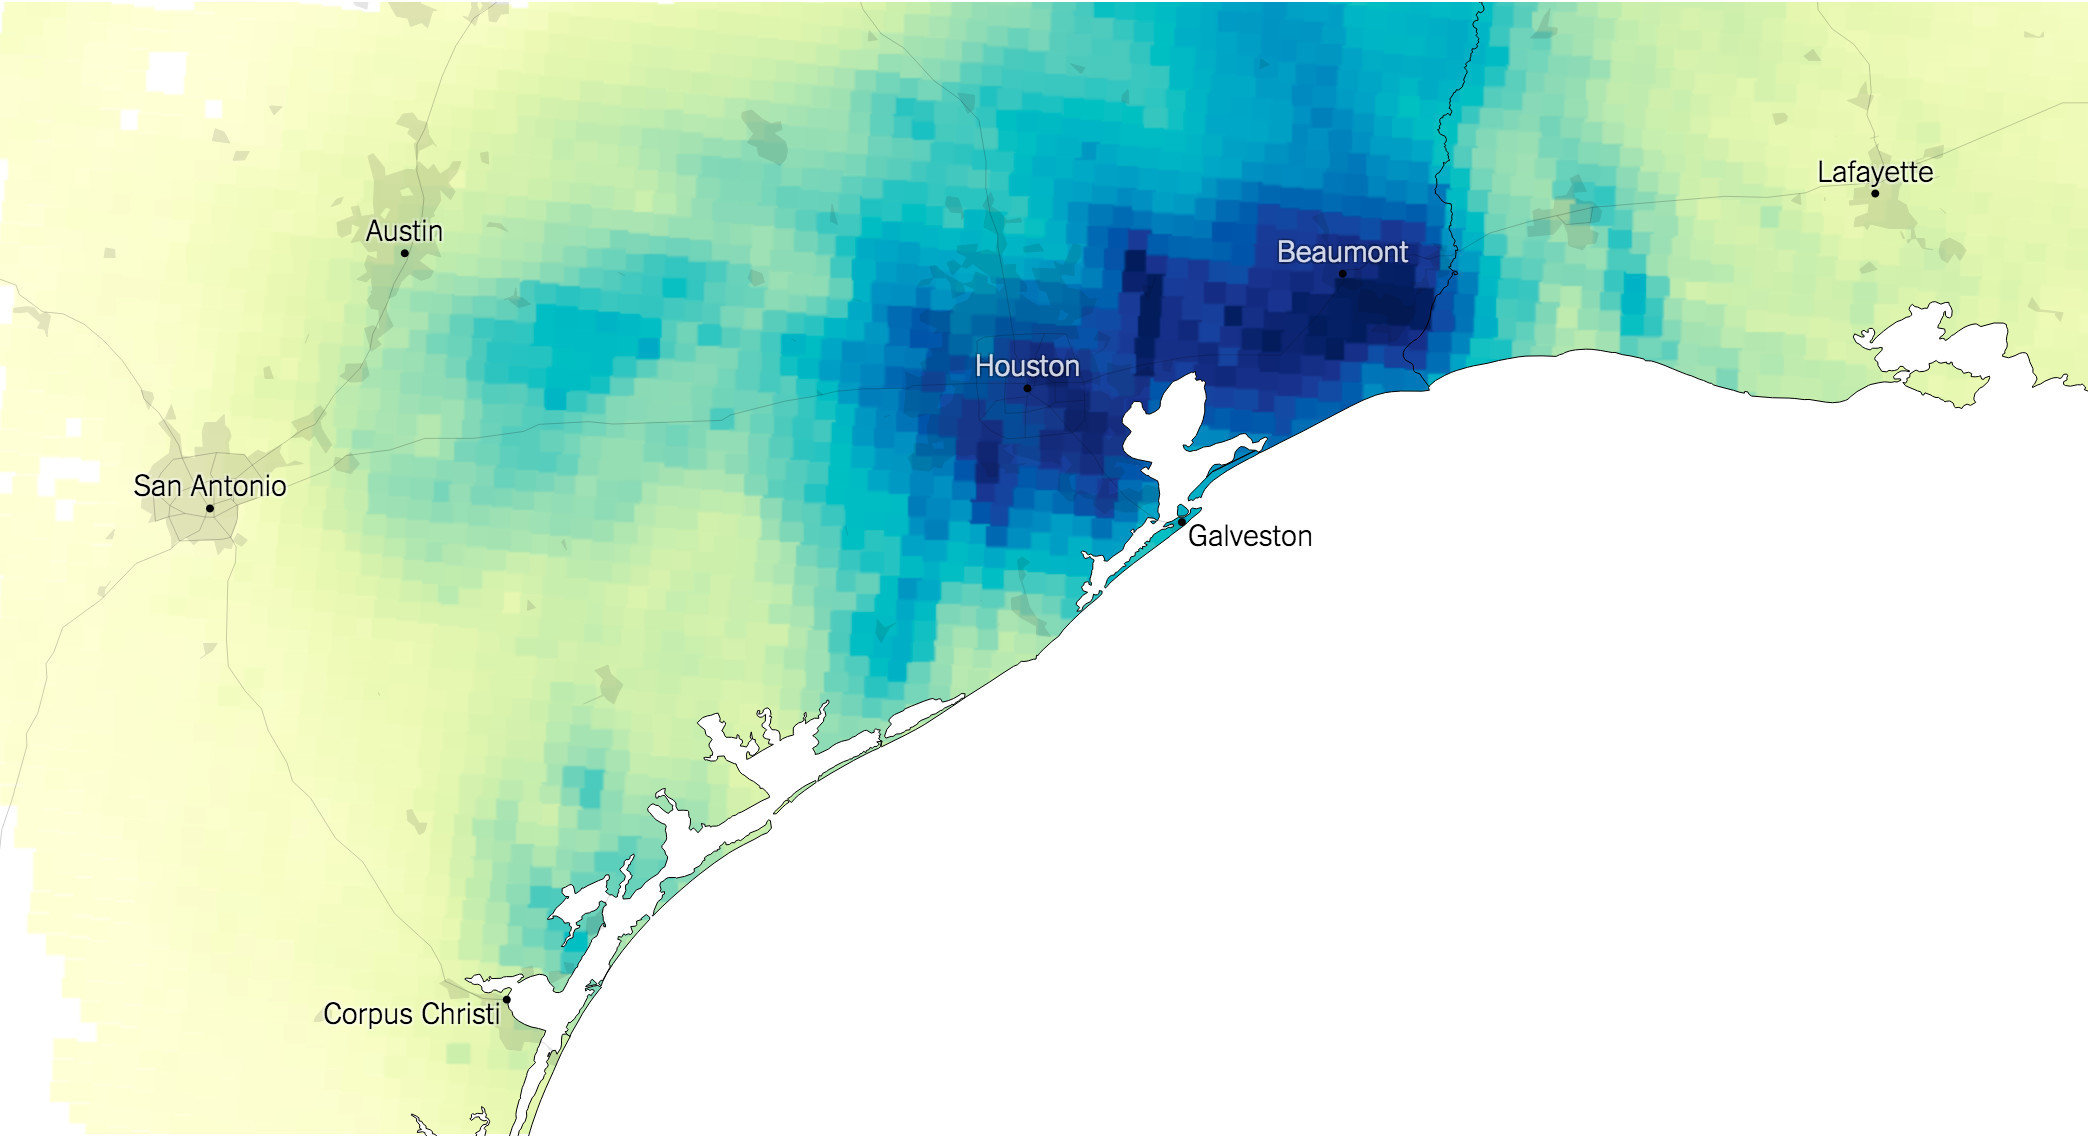 A precipitation map of the area around Houston, with a yellow - blue colour scheme, without a legend